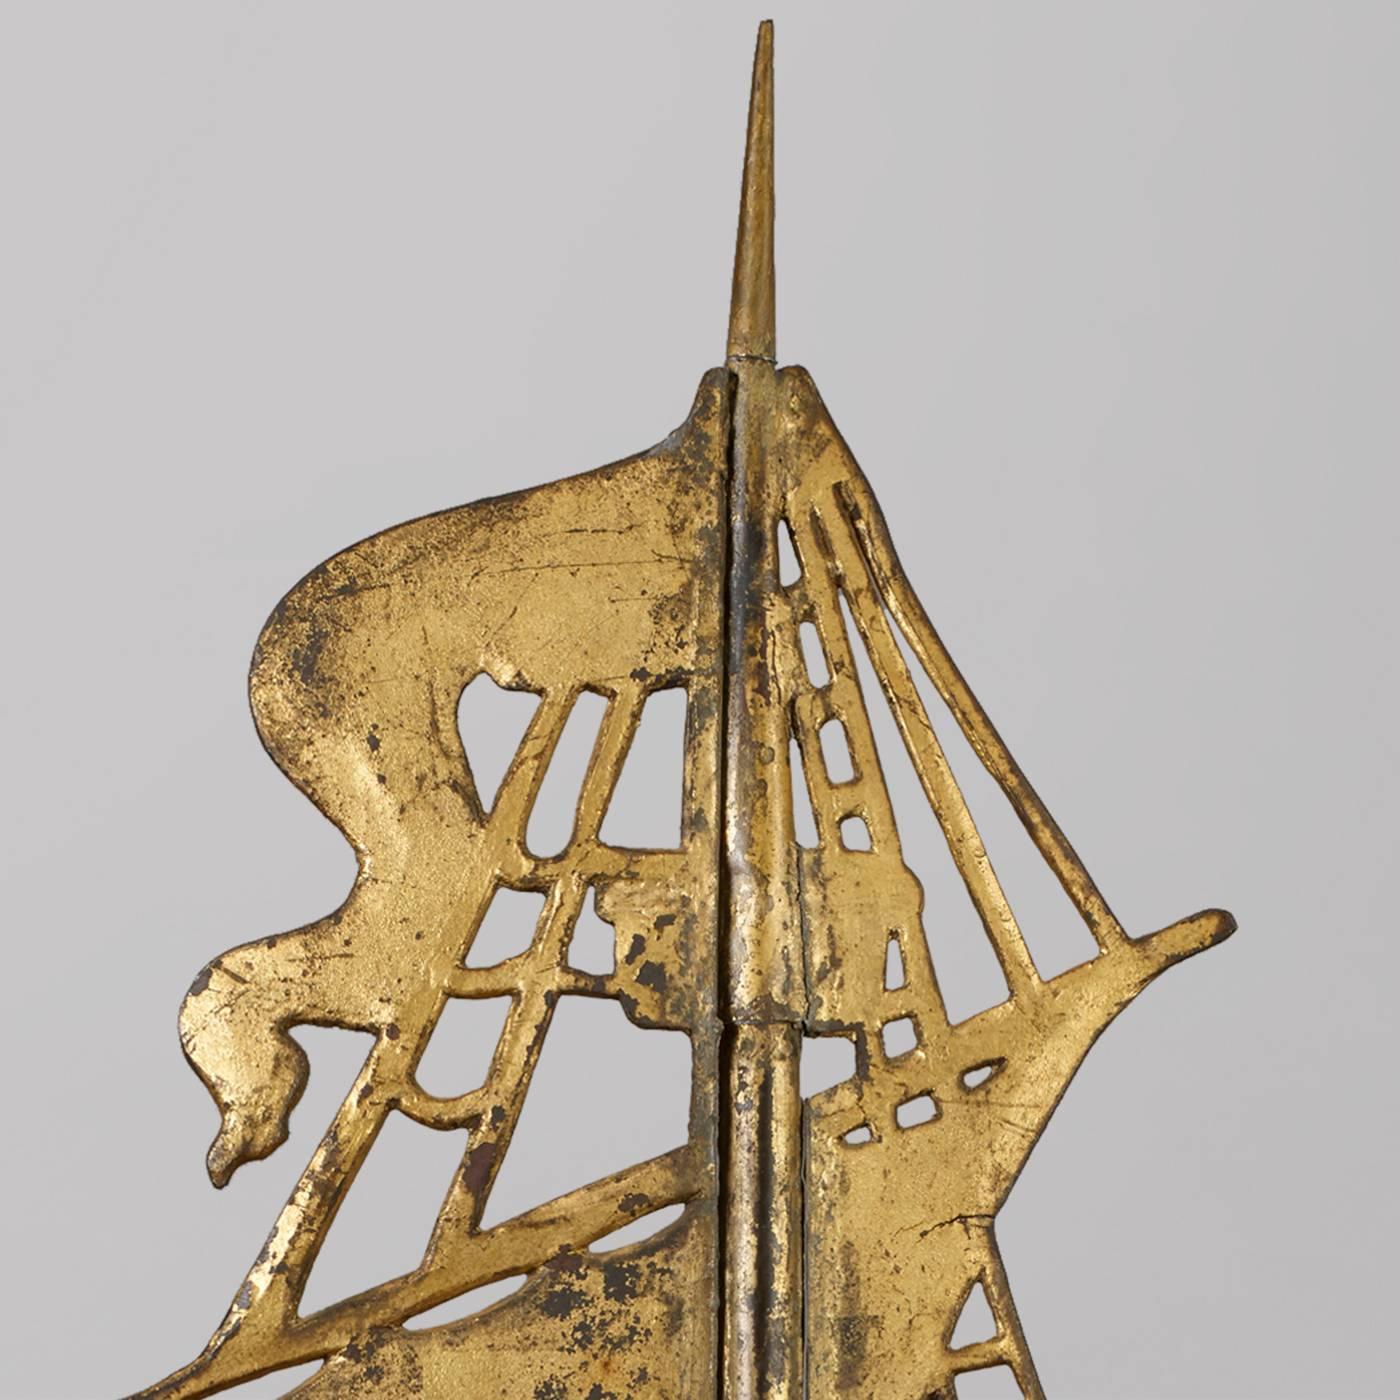 This American ship weathervane is made in copper with cast iron sails and upper portion. The piece still retains its original gilt and is probably made in New England, possibly Cushing and White, Waltham, Massachusetts, circa 1880. 

Condition: